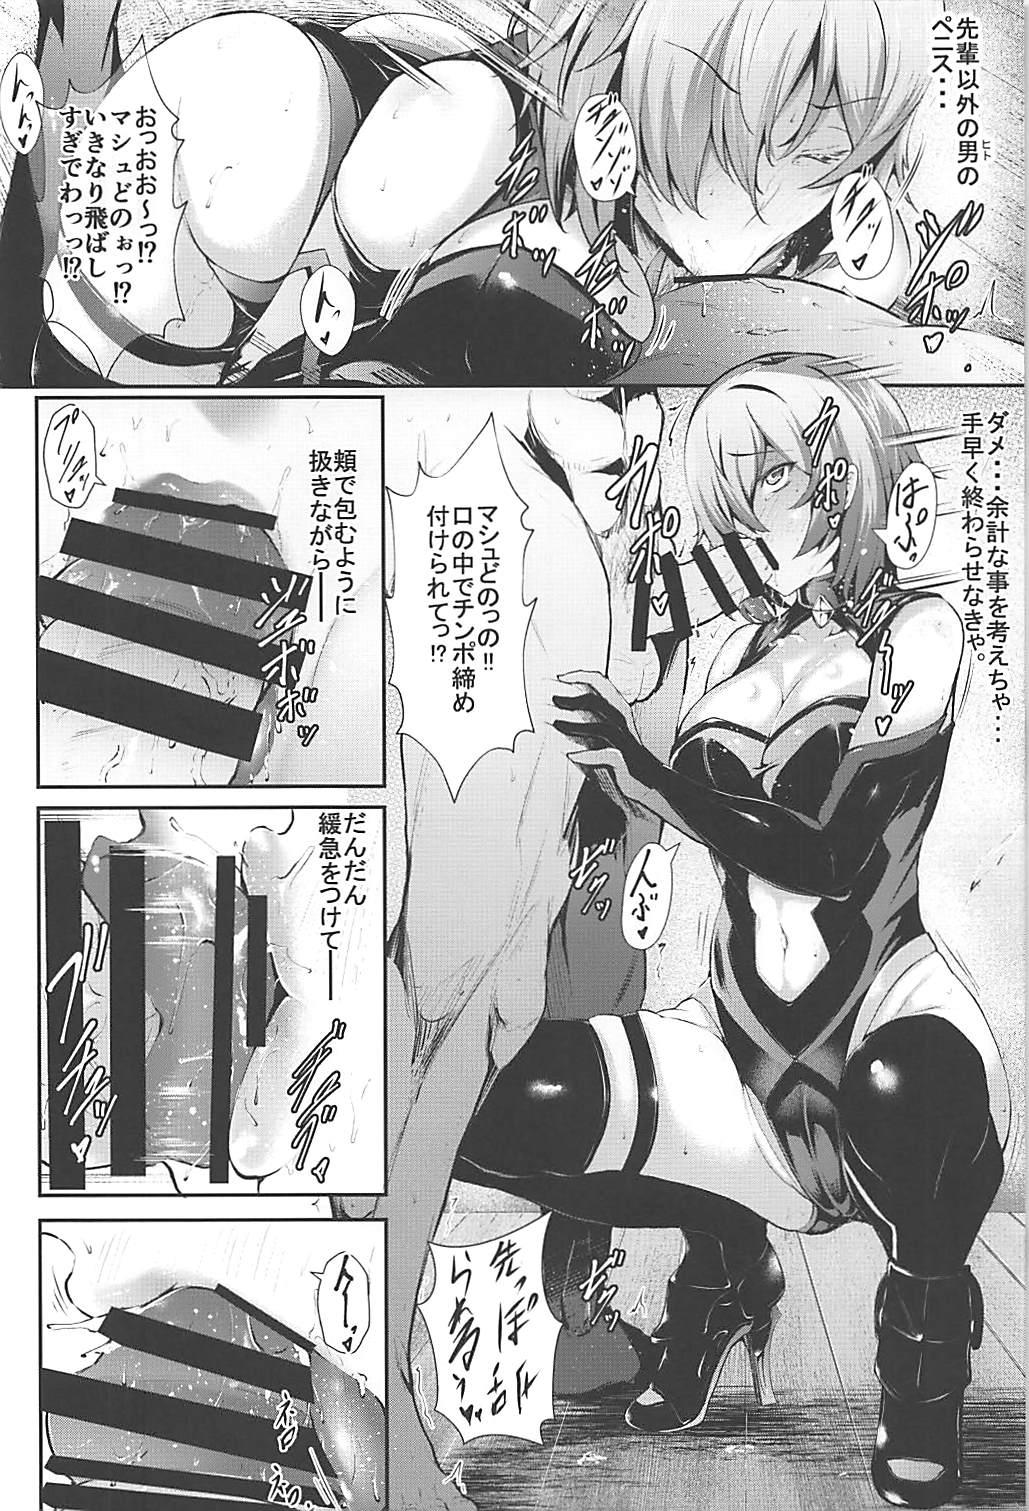 Sexteen Nympho-mania? - Fate grand order Desnuda - Page 7